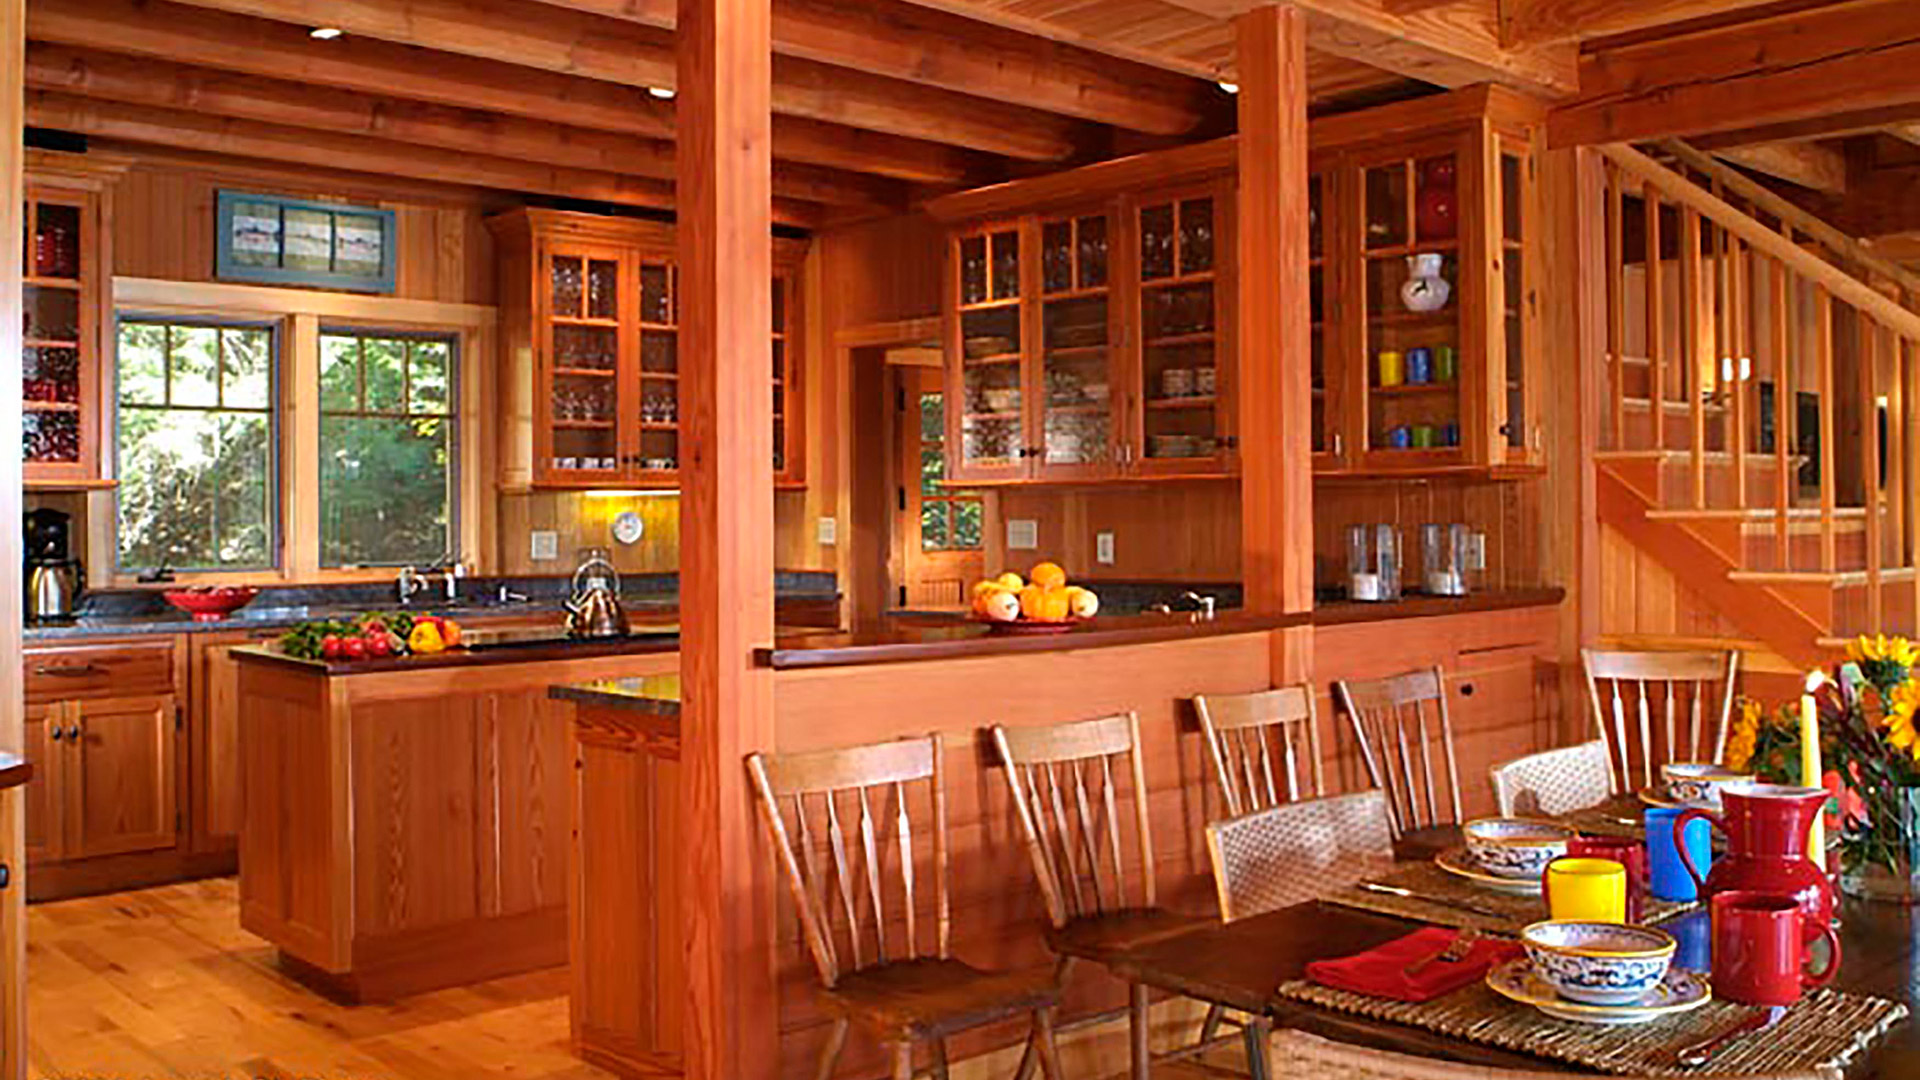 Silver Lake, New Hampshire rustic kitchen with heart pine cabinets